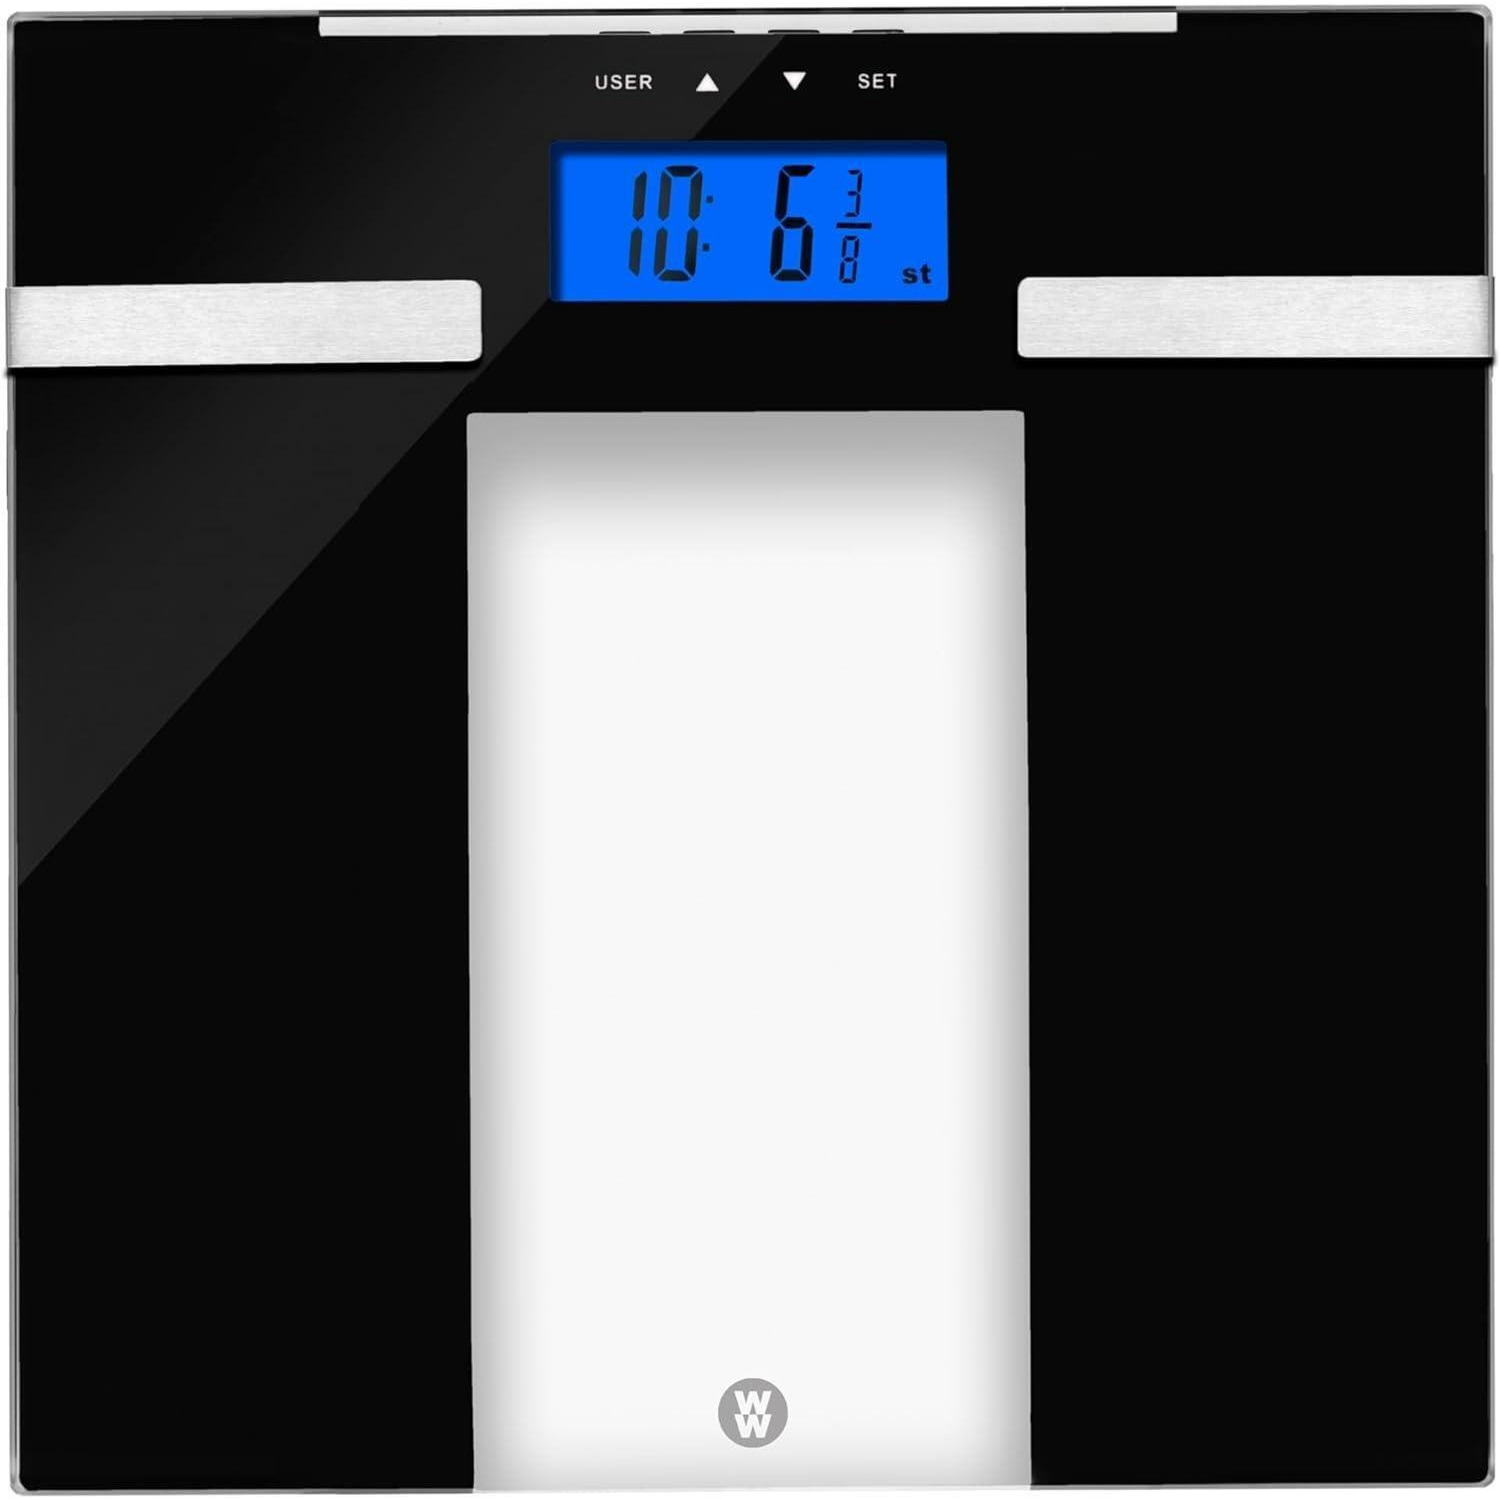 Weight Watchers Ultra Slim Glass Electronic Body Analyser Bathroom Scale - image 1